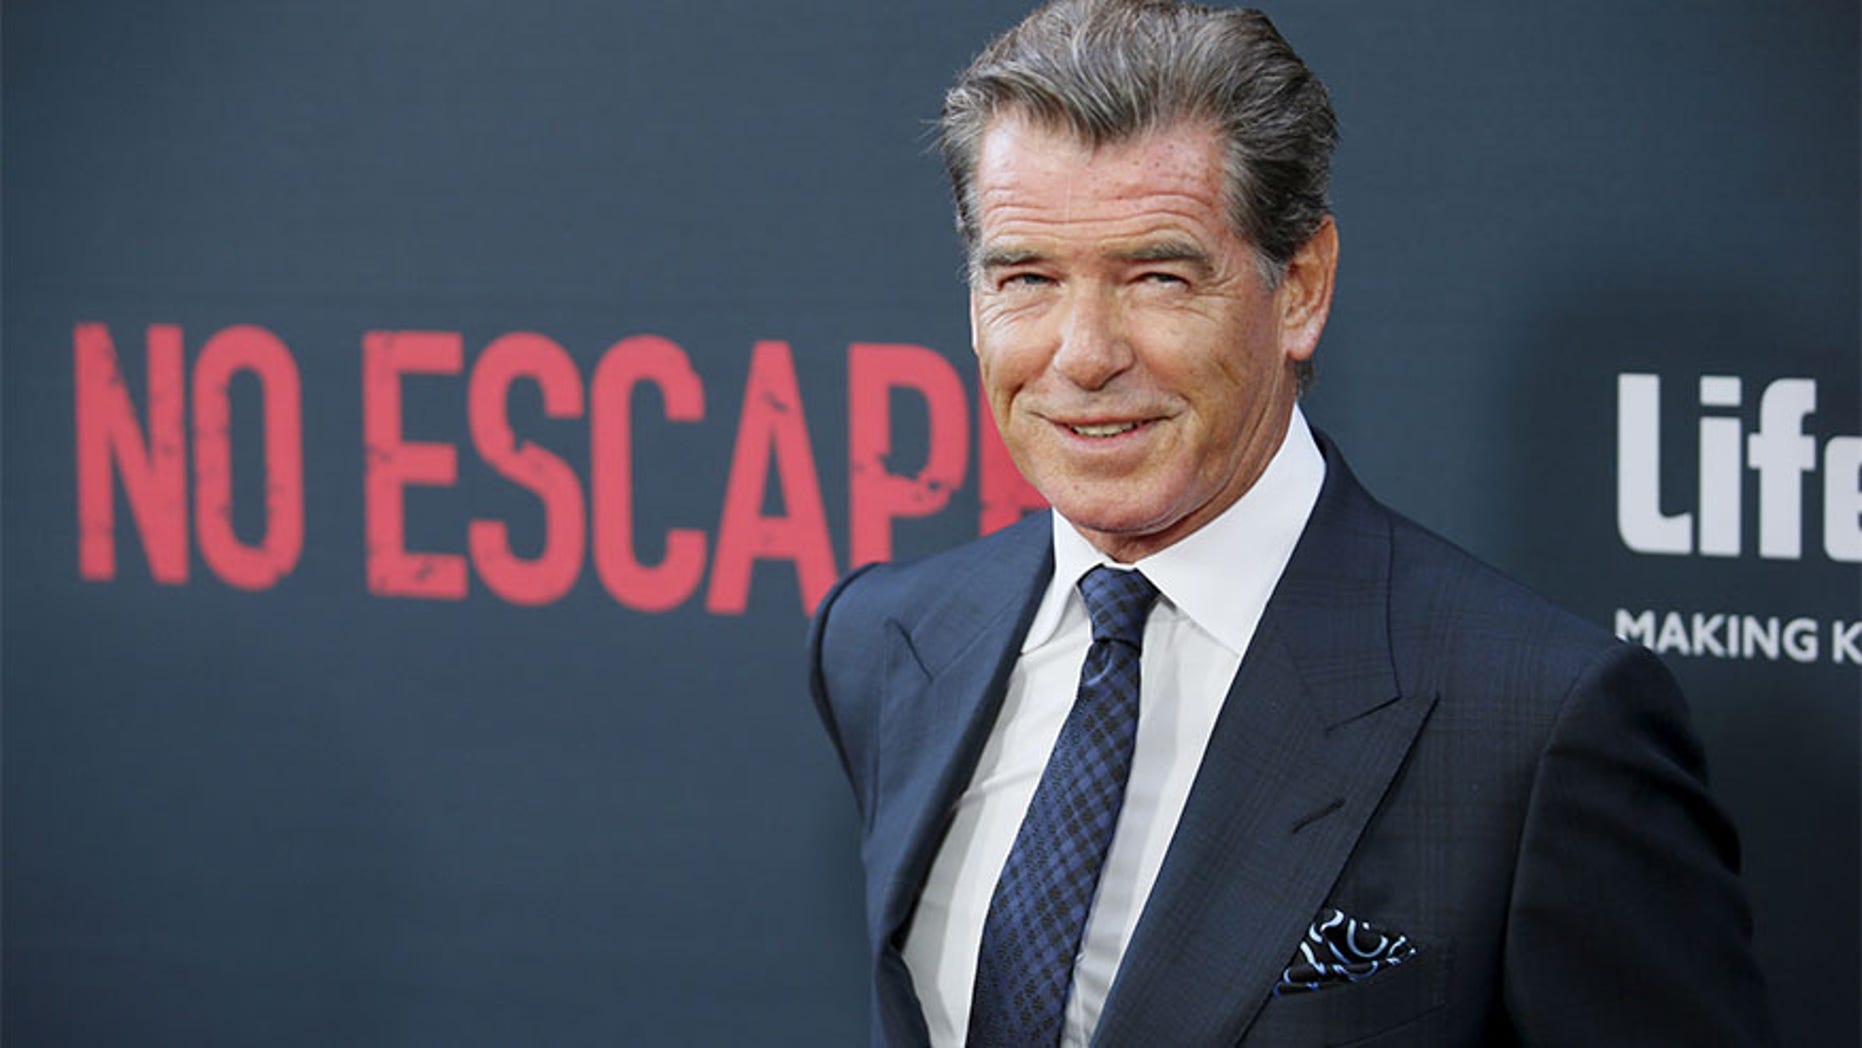 Pierce Brosnan not sure who the next Bond will but says 'whoever he be, I wish him well'